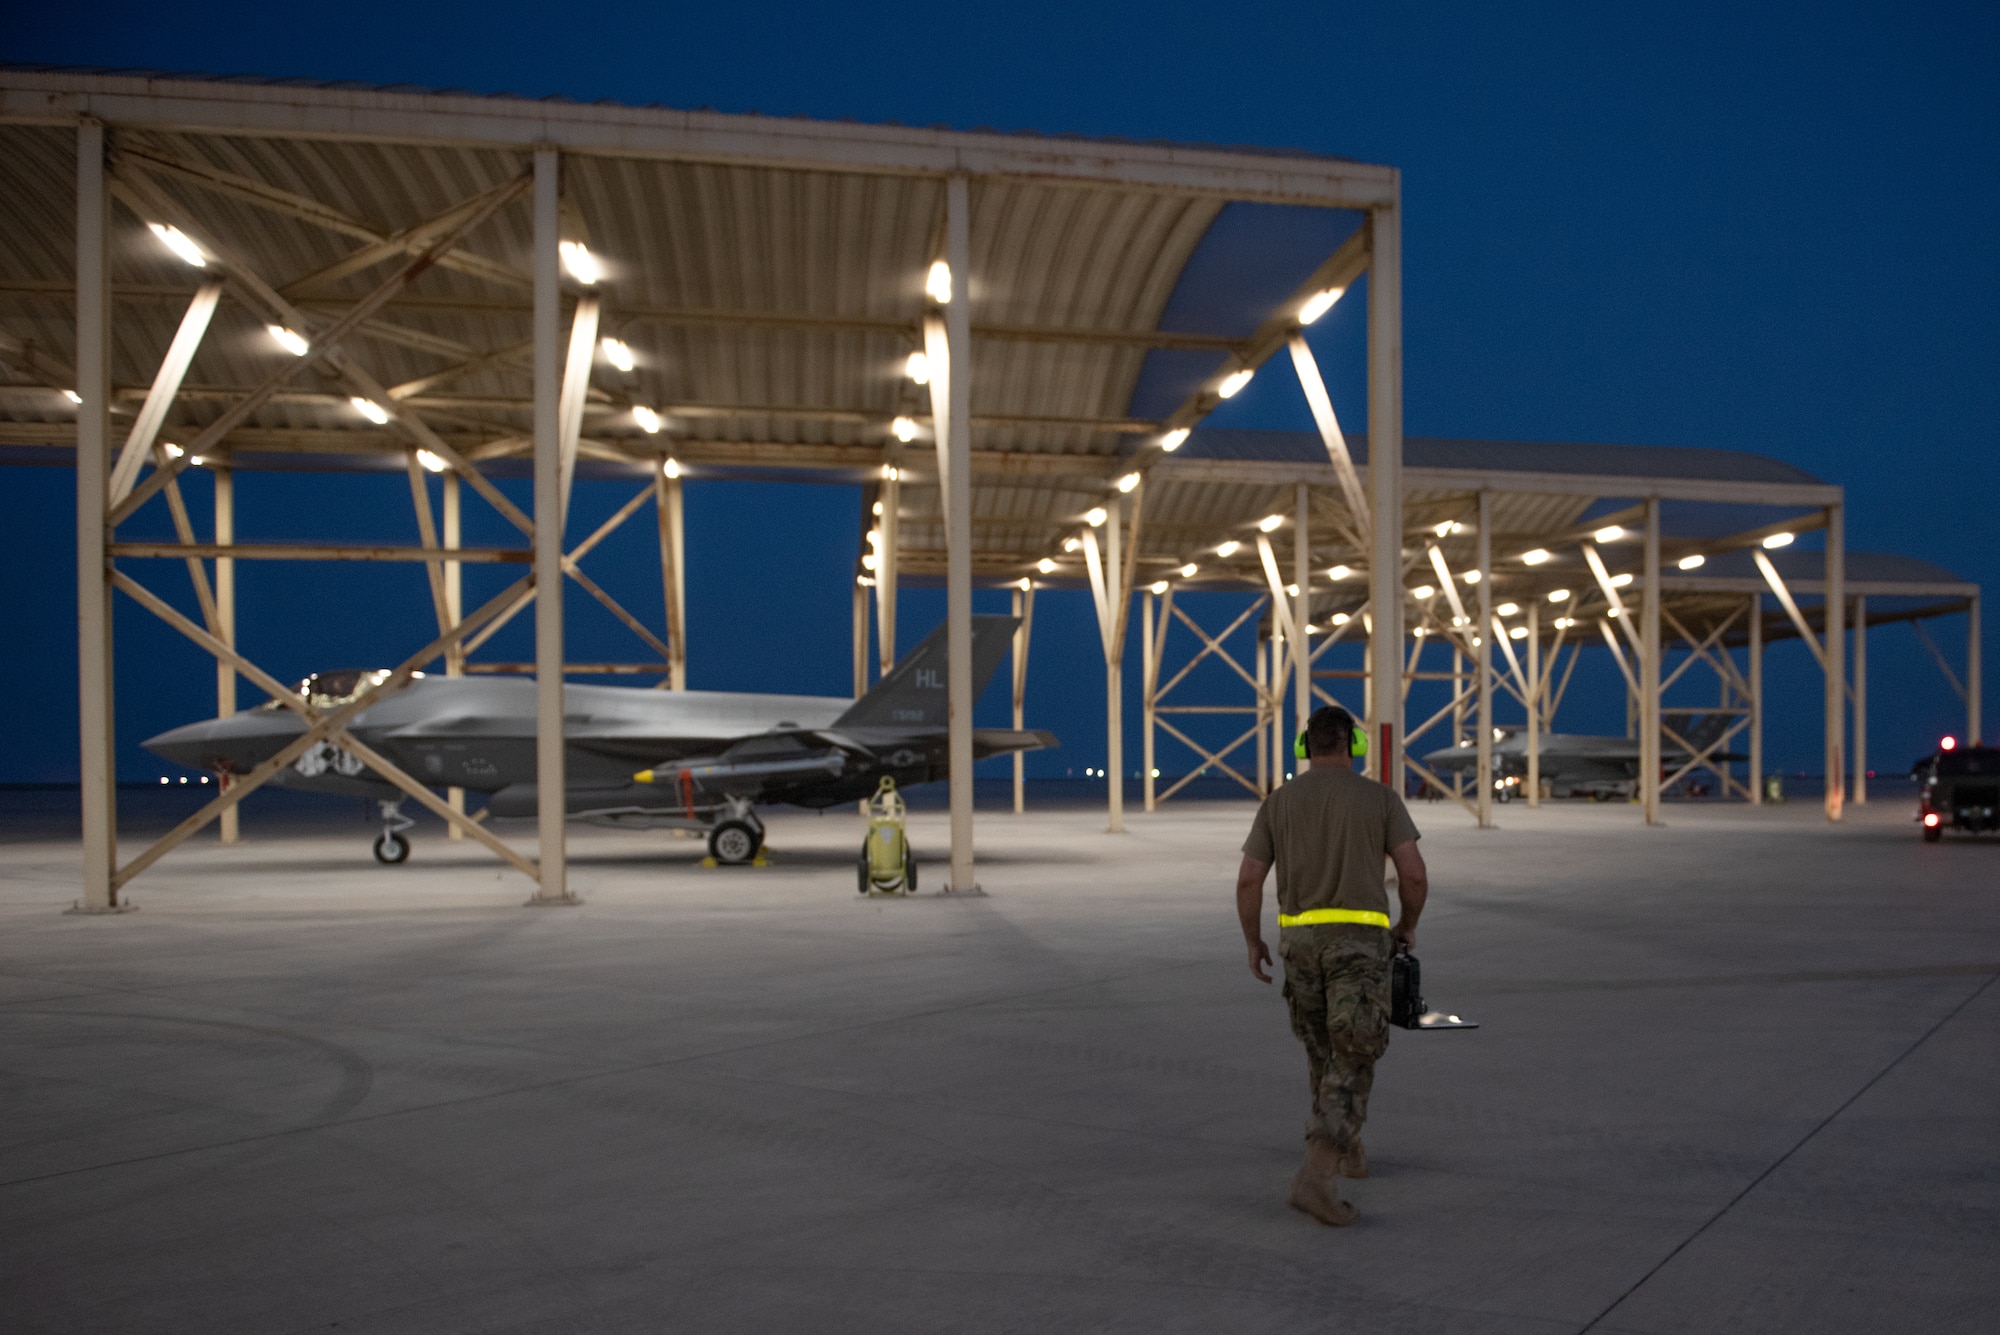 Staff Sgt. Karl Tesch, 380th Expeditionary Aircraft Maintenance Squadron weapons load crew chief, performs an inspection prior to launch April 26, 2019, at Al Dhafra Air Base, United Arab Emirates.